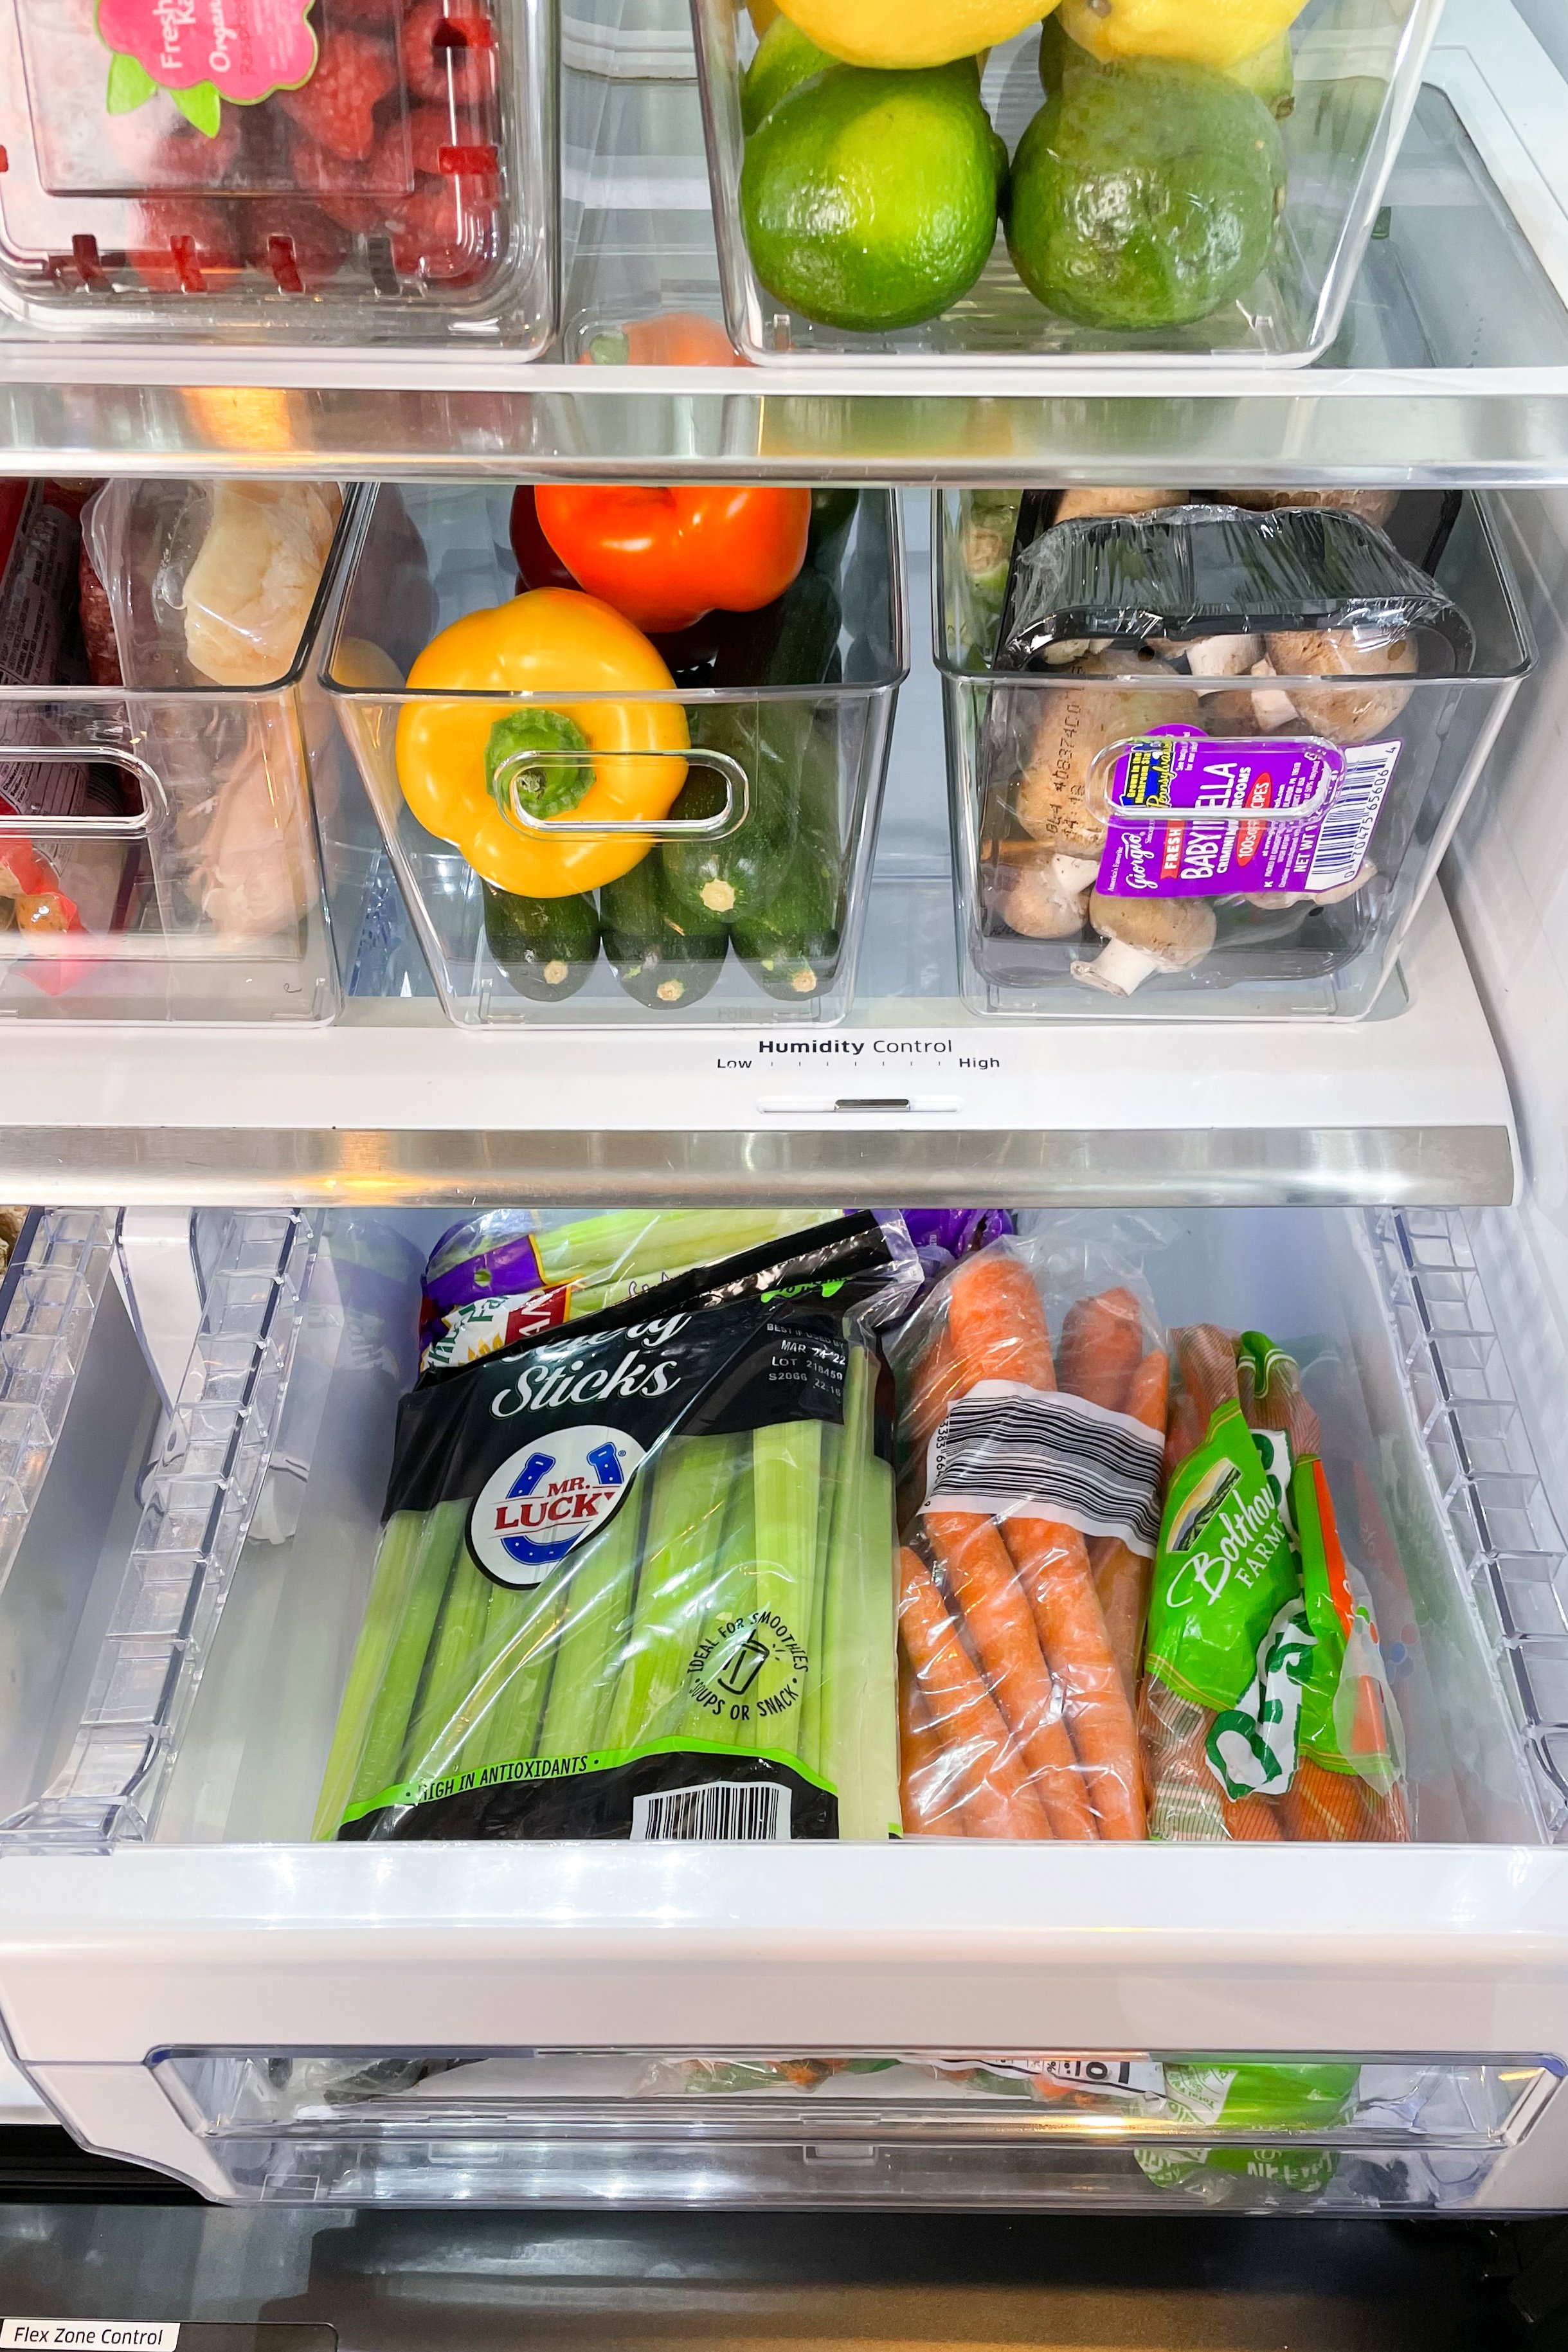 How to Organize Your Refrigerator for Healthy Eating